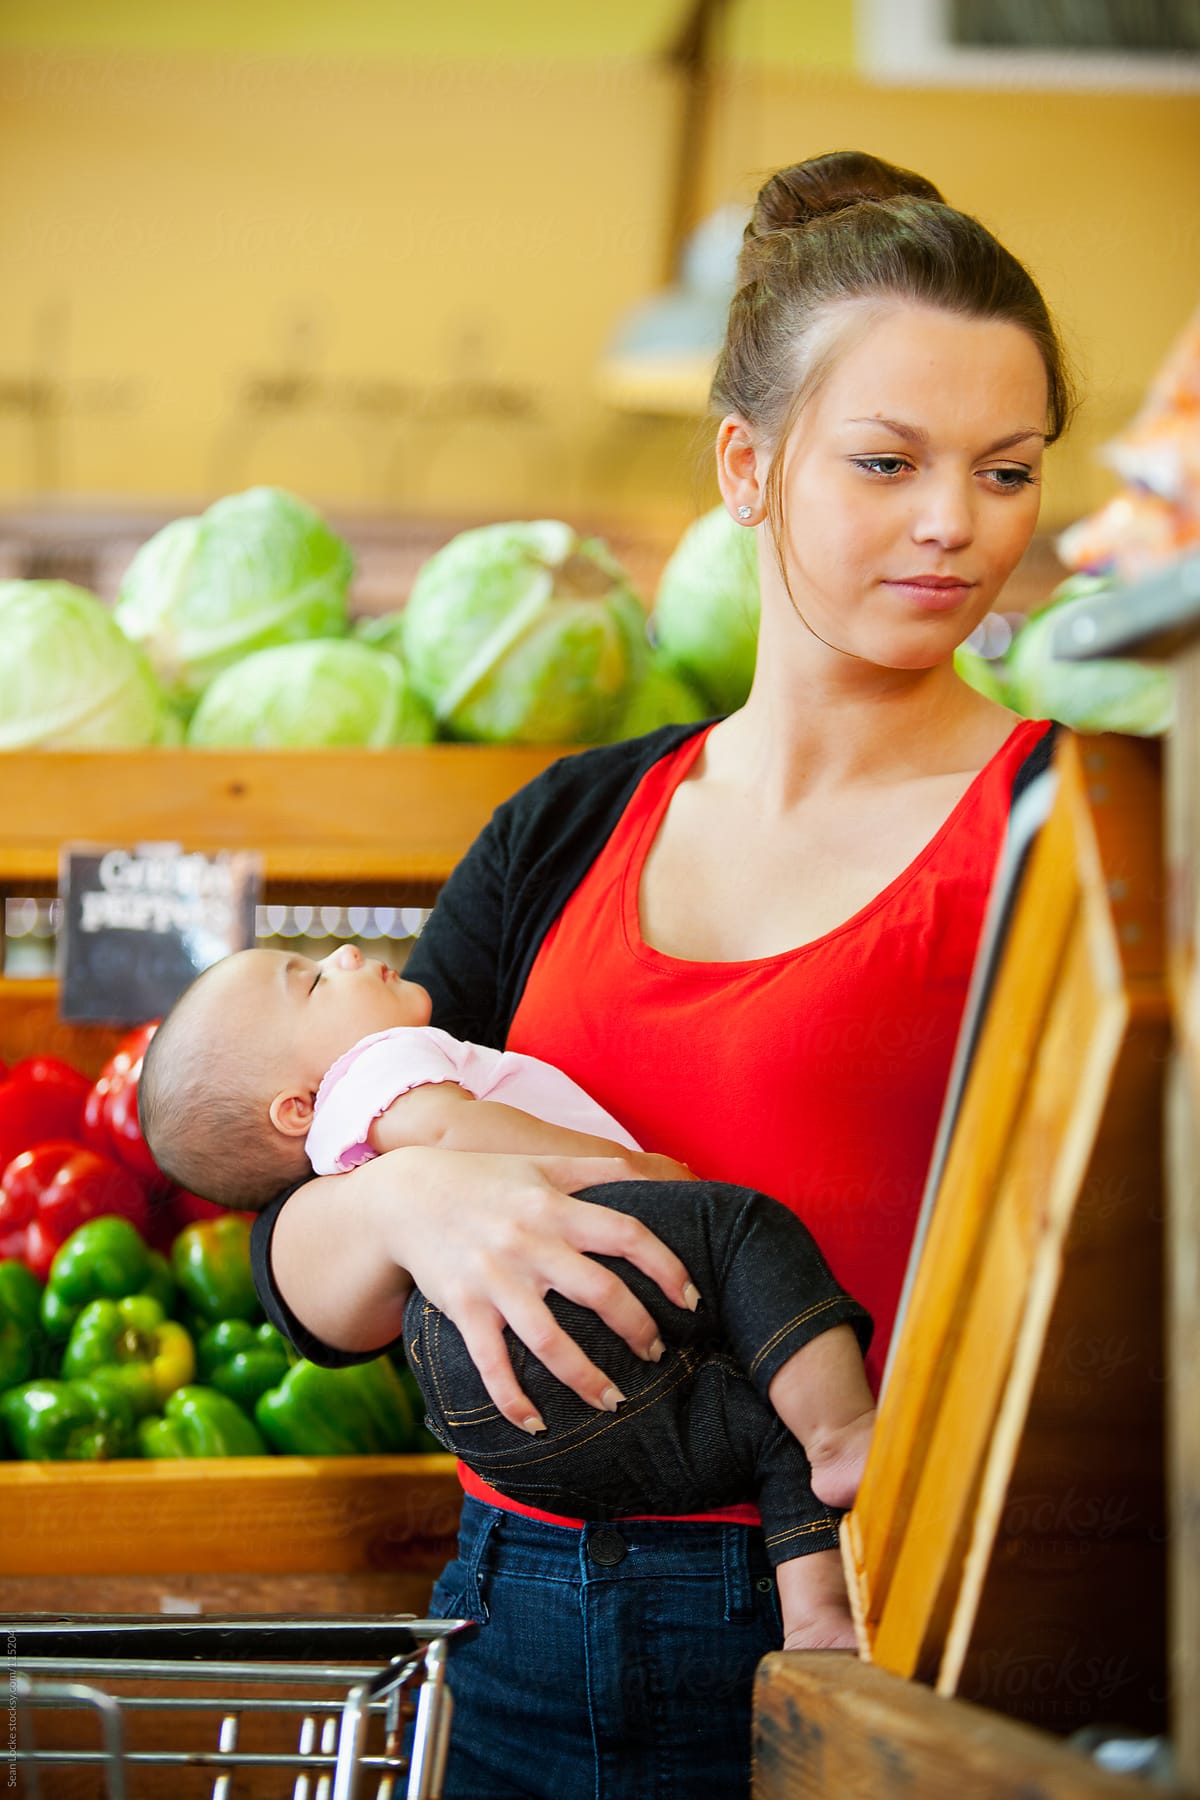 Market: Mother Holds Sleeping Baby While Shopping